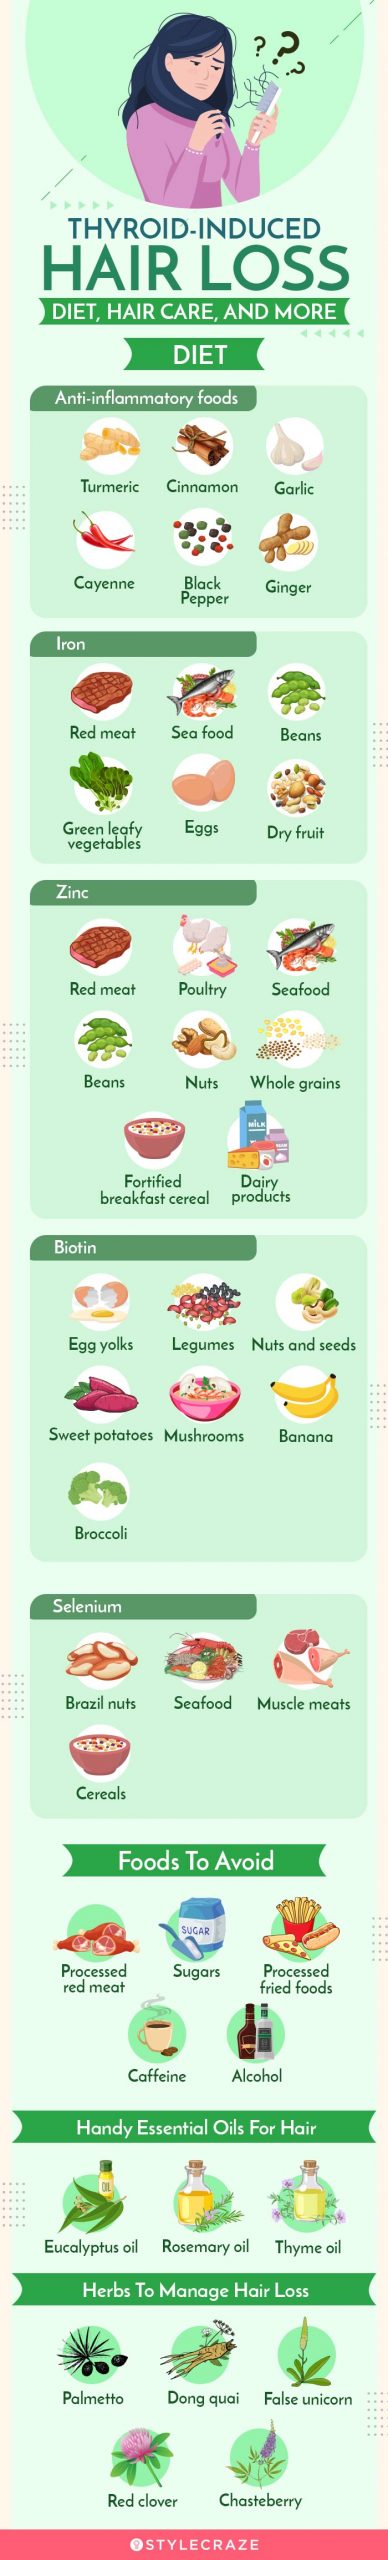 thyroid-induced hair loss diet [infographic]